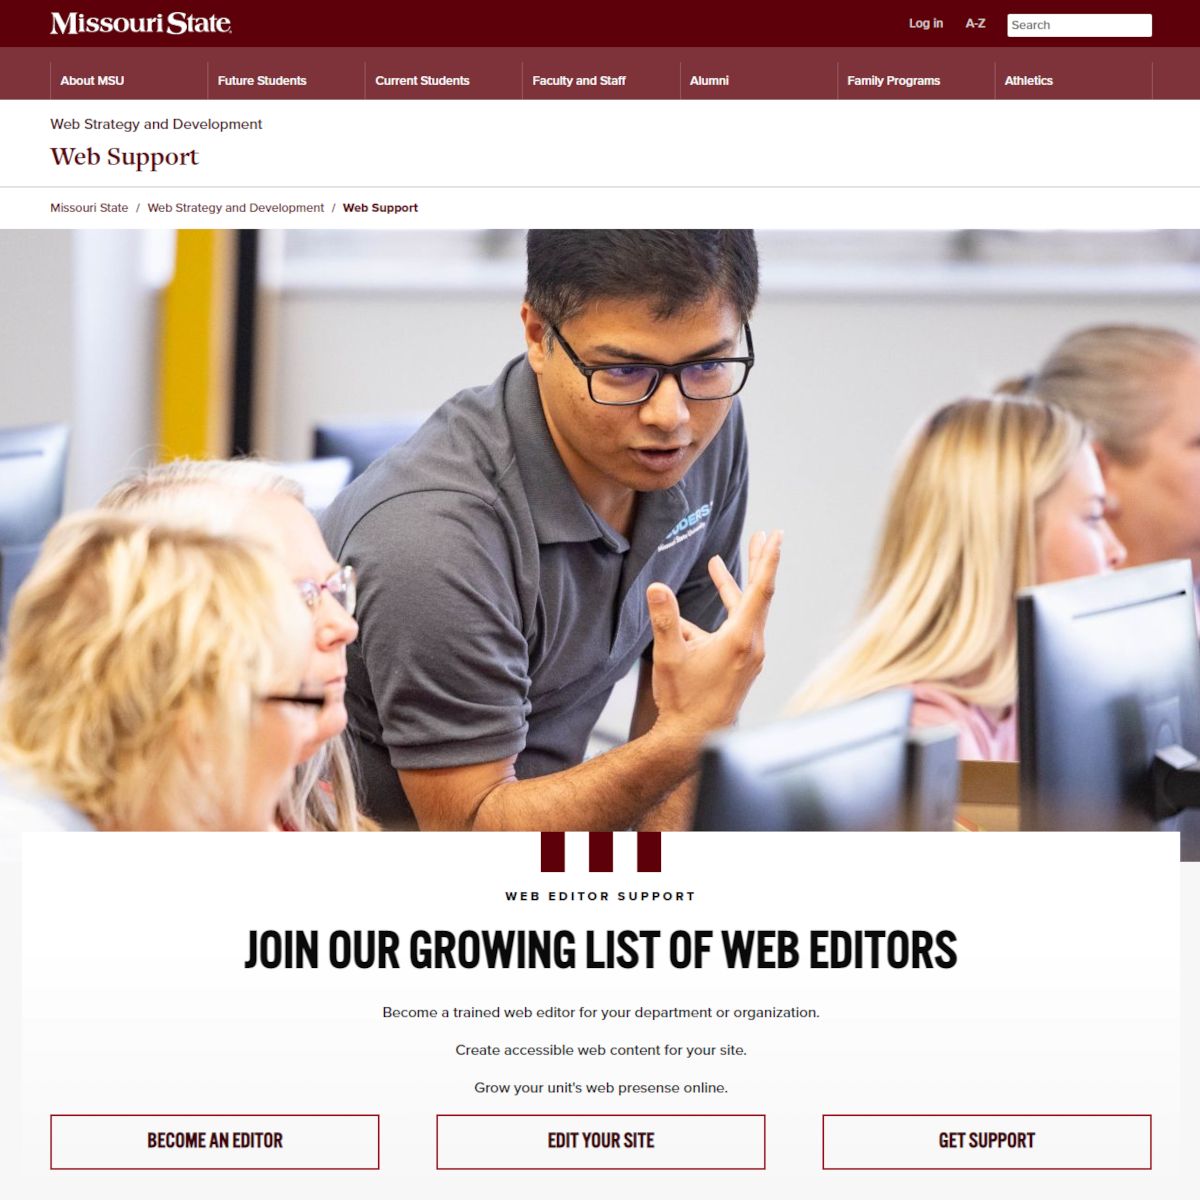 Join our growing list of web editors